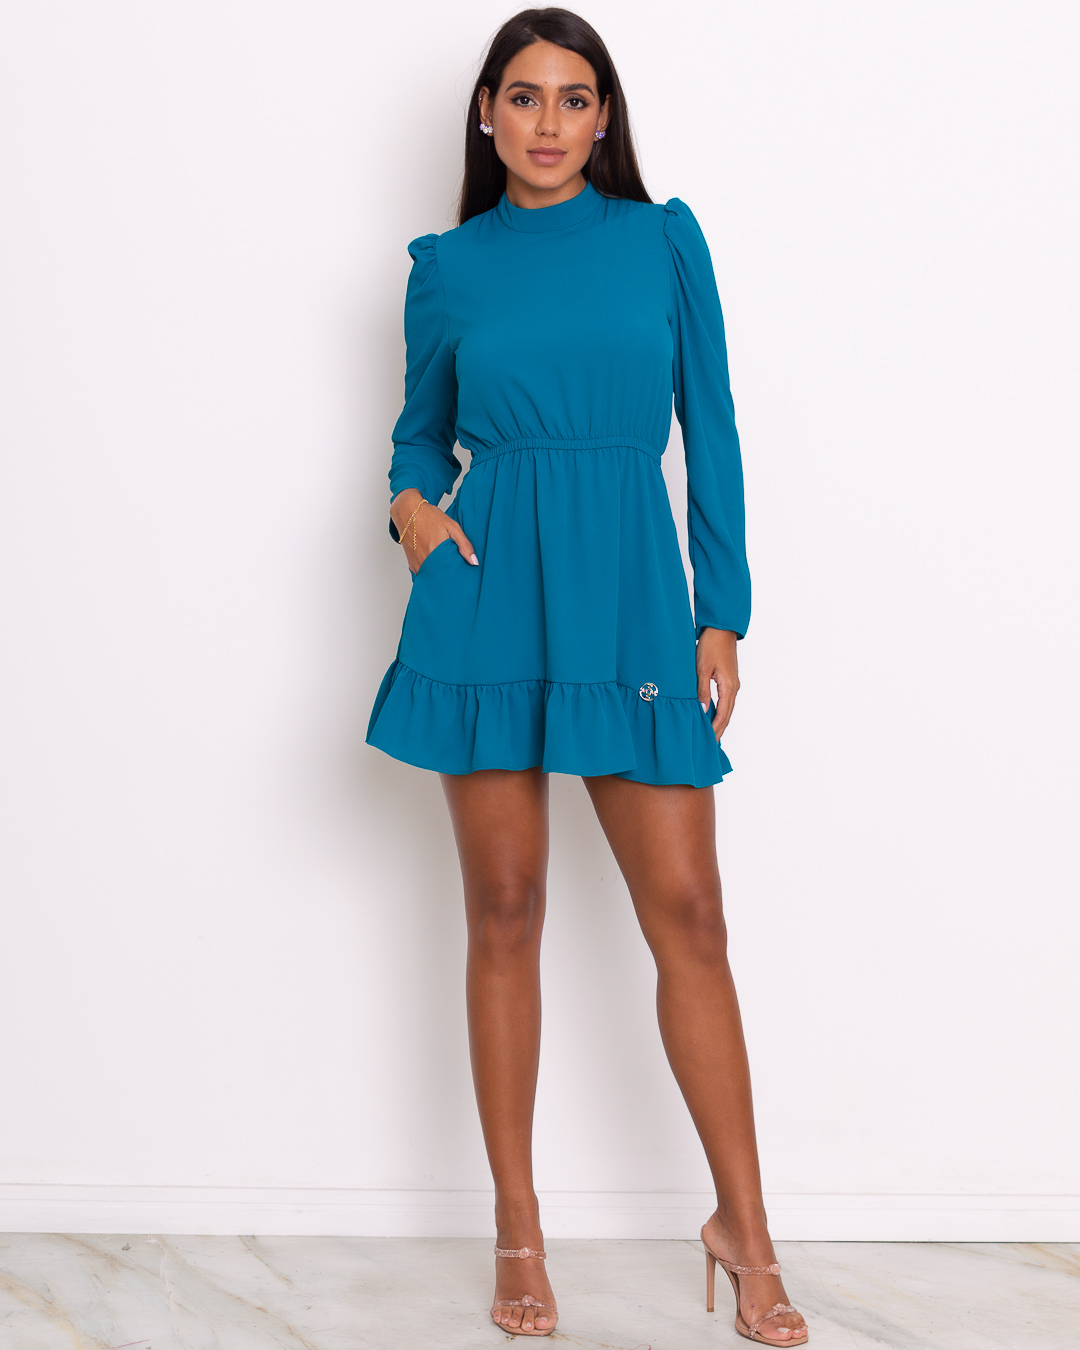 Miss Misses - Dress Miss Misses workout wheeldo Ruched Long Sleeve With Belt Blue - 18821AZUL